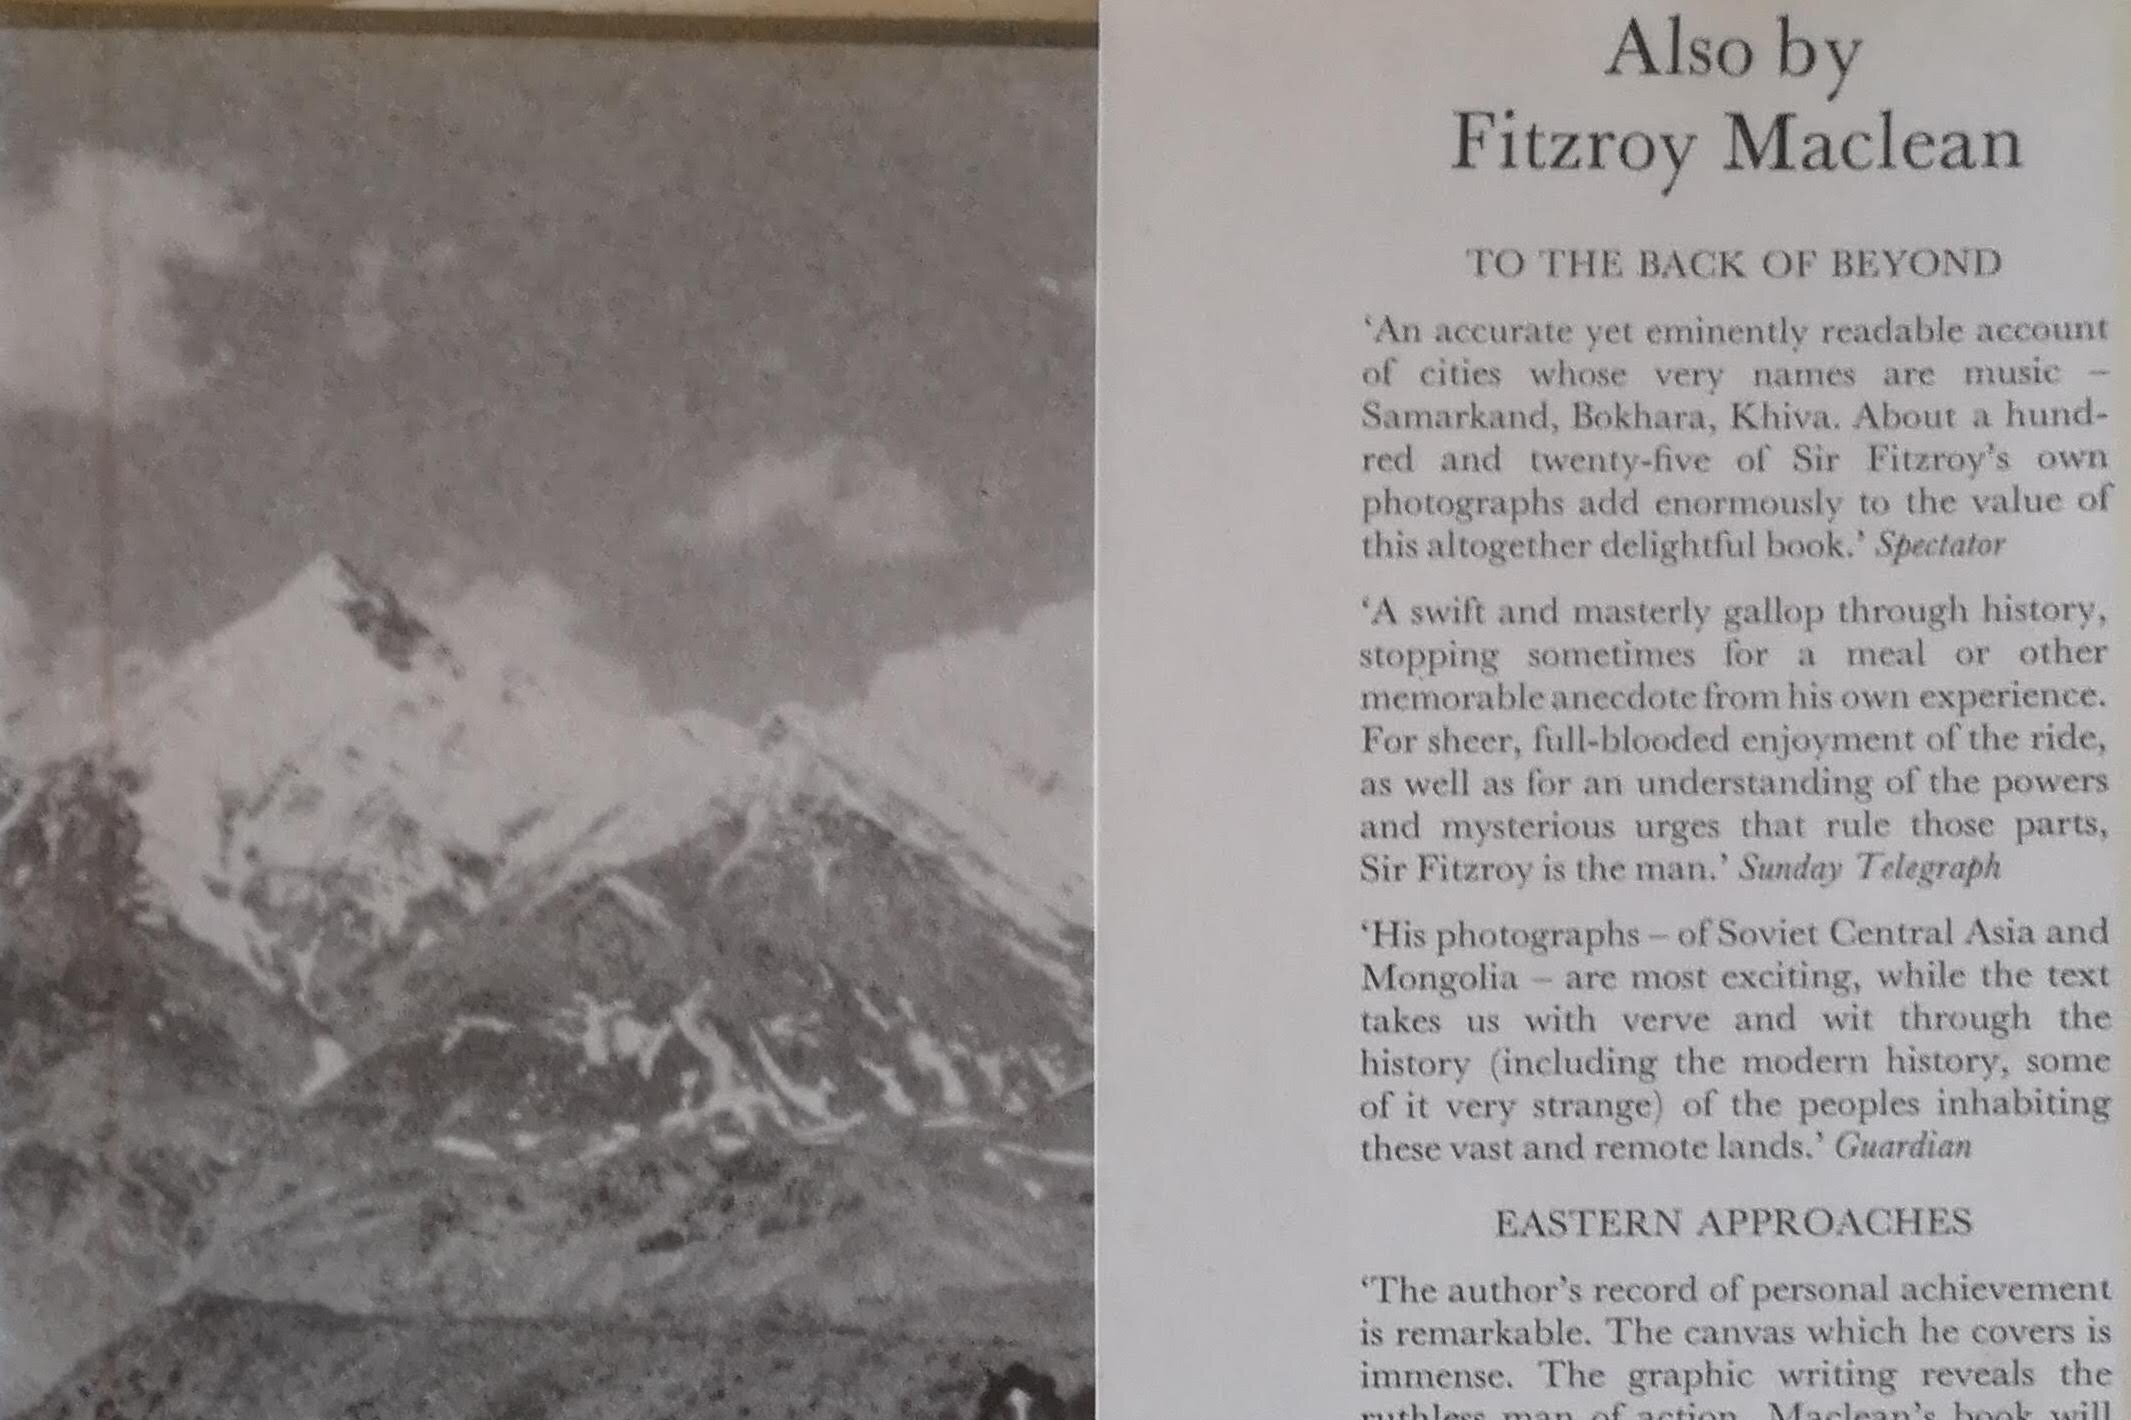 Also by Fitzroy Maclean book 